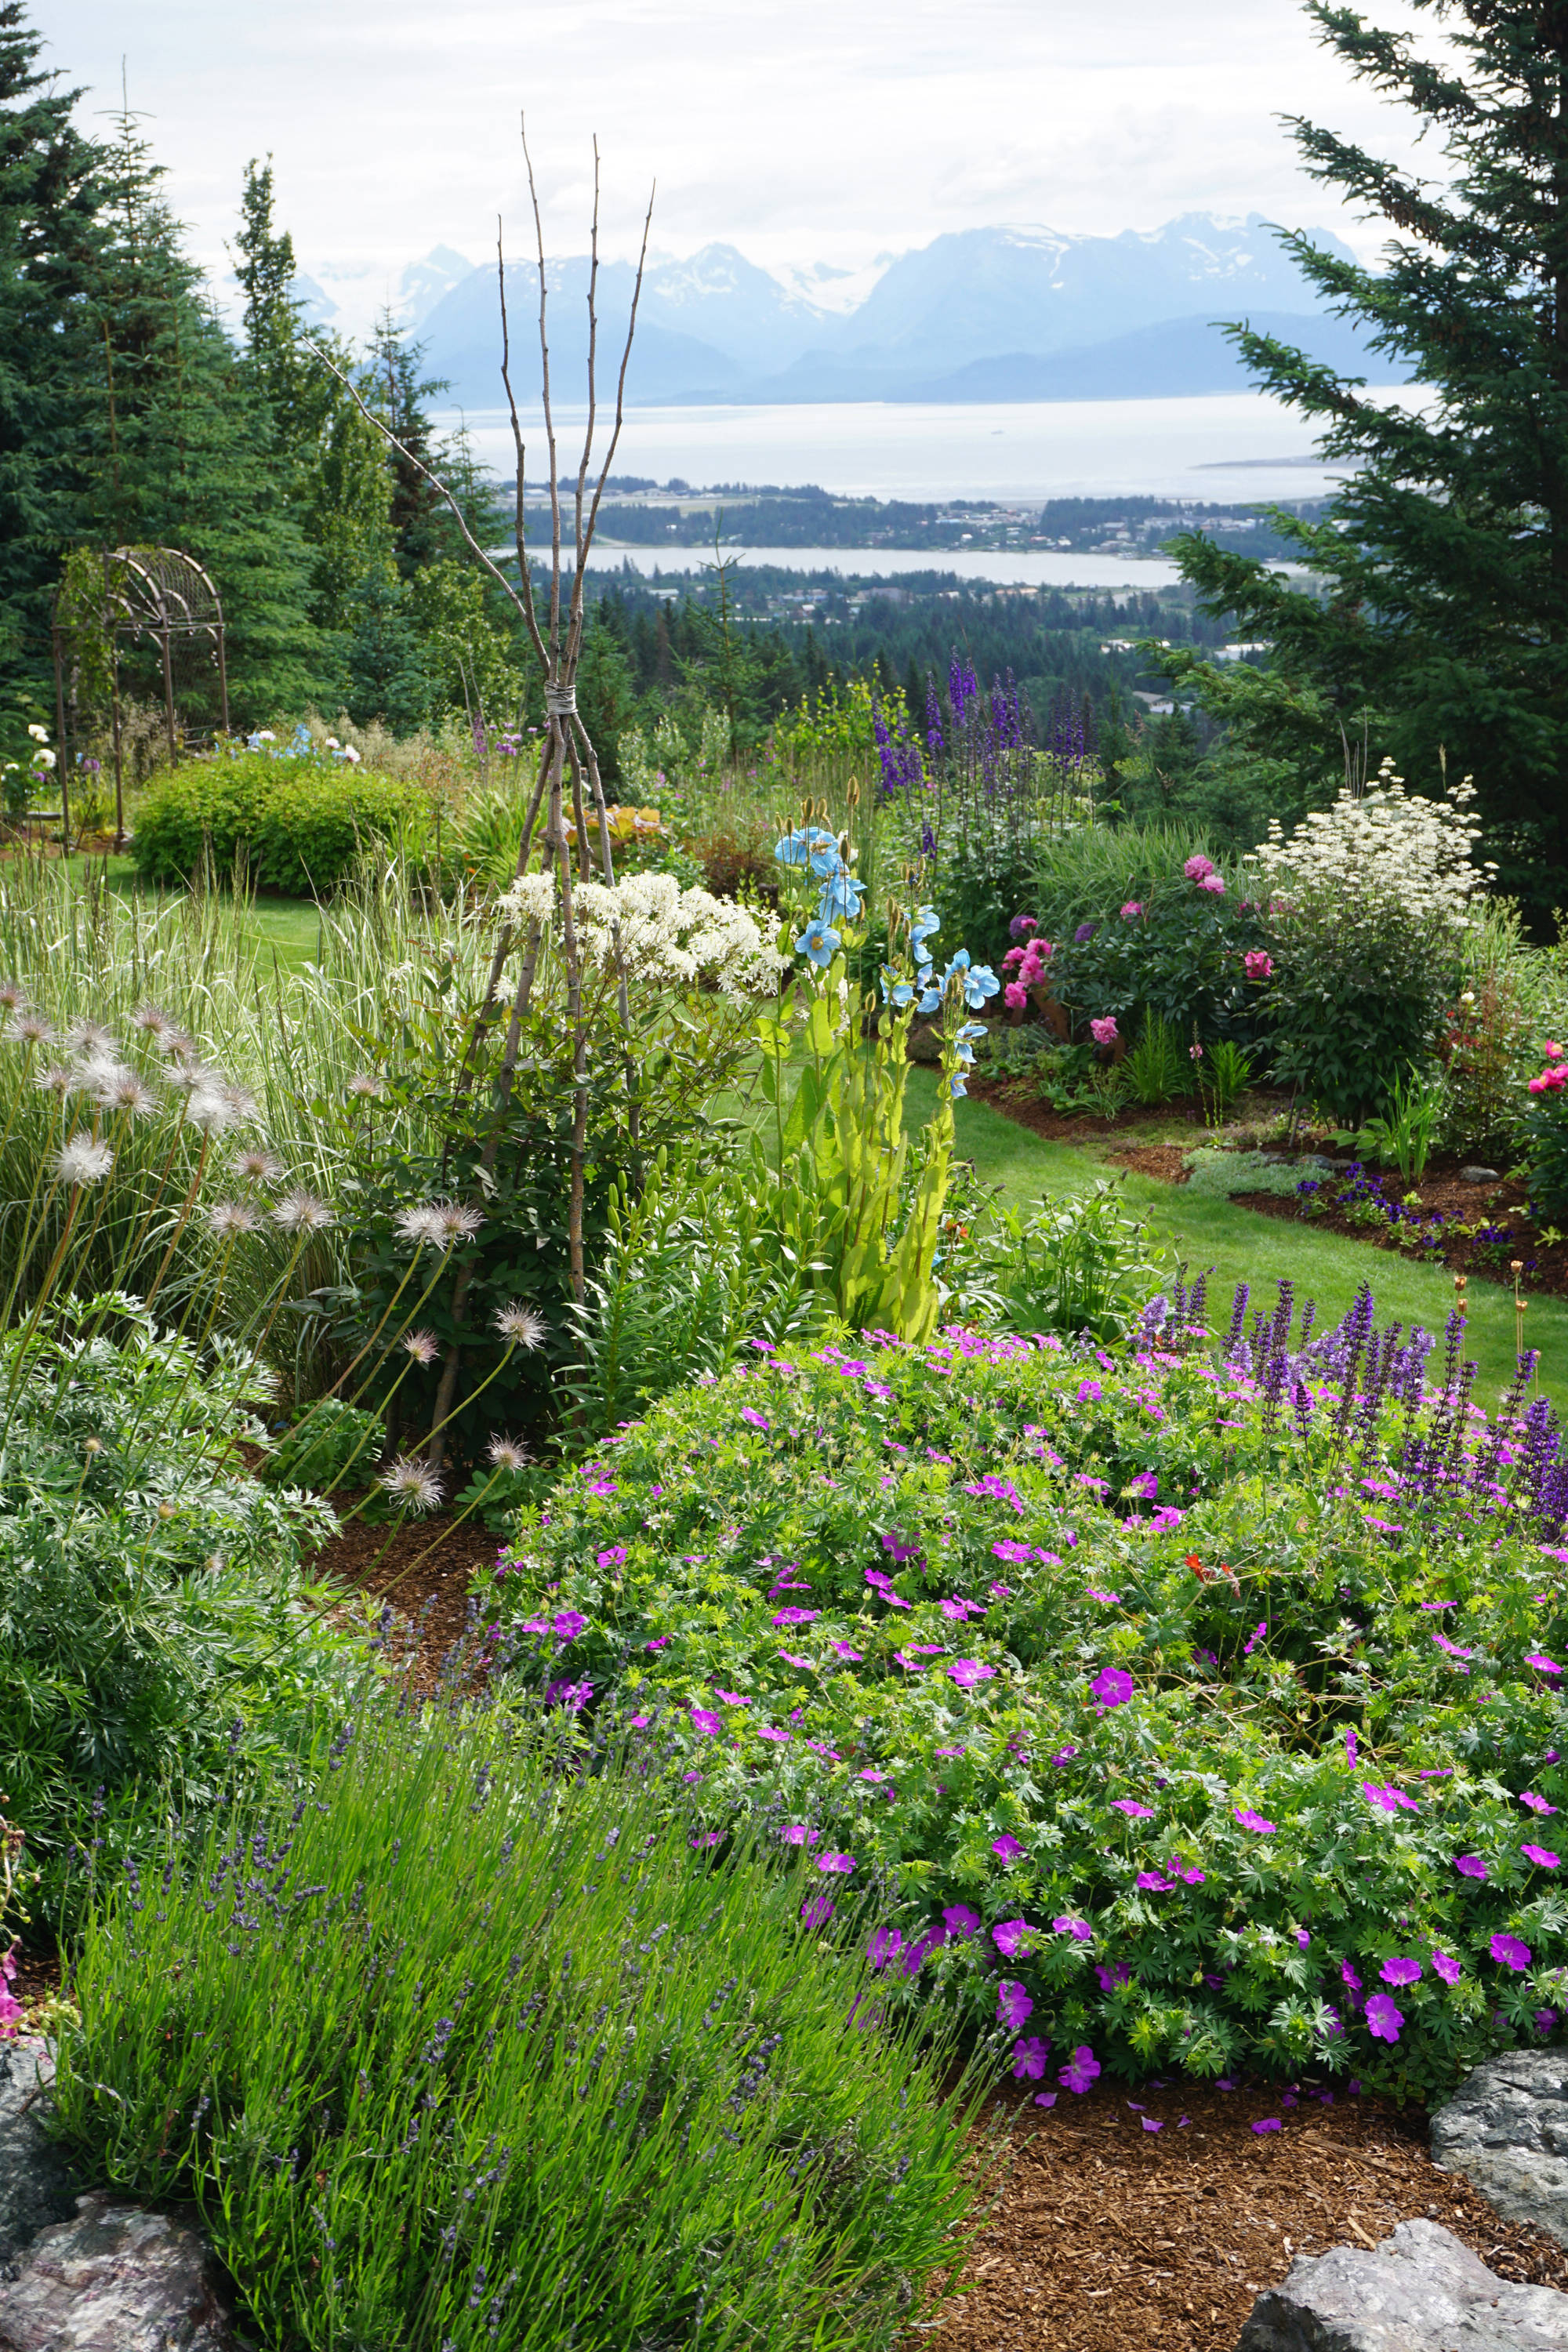 Flower beds in terraces frame a view of the Homer Spit at Joan Splinter’s garden on Reber Road off West Hill Road on July 30, 2017 in Homer, Alaska. Her garden was featured in the Homer Garden Club’s 2017 Summer Garden Tours. (Photo by Michael Armstrong/Homer News)